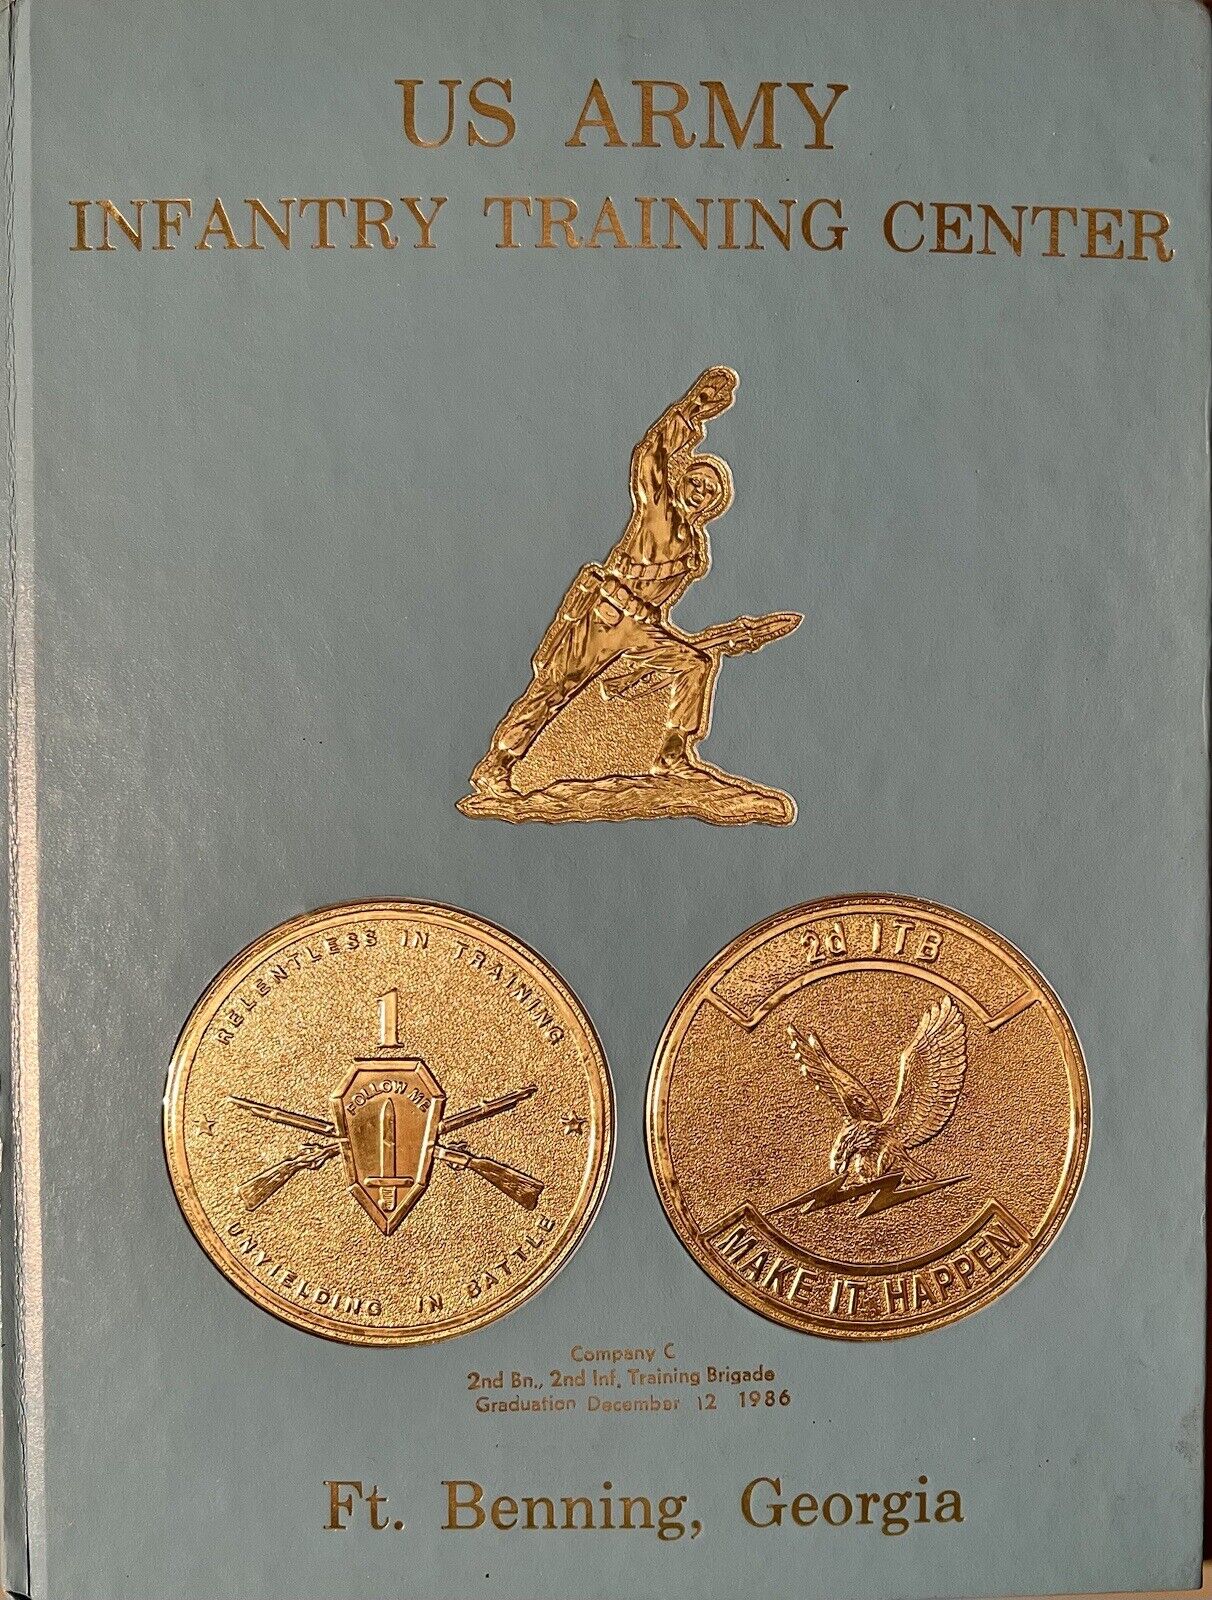 1987 US Army Infantry Training Center, Ft. Benning, GA - Company C Yearbook